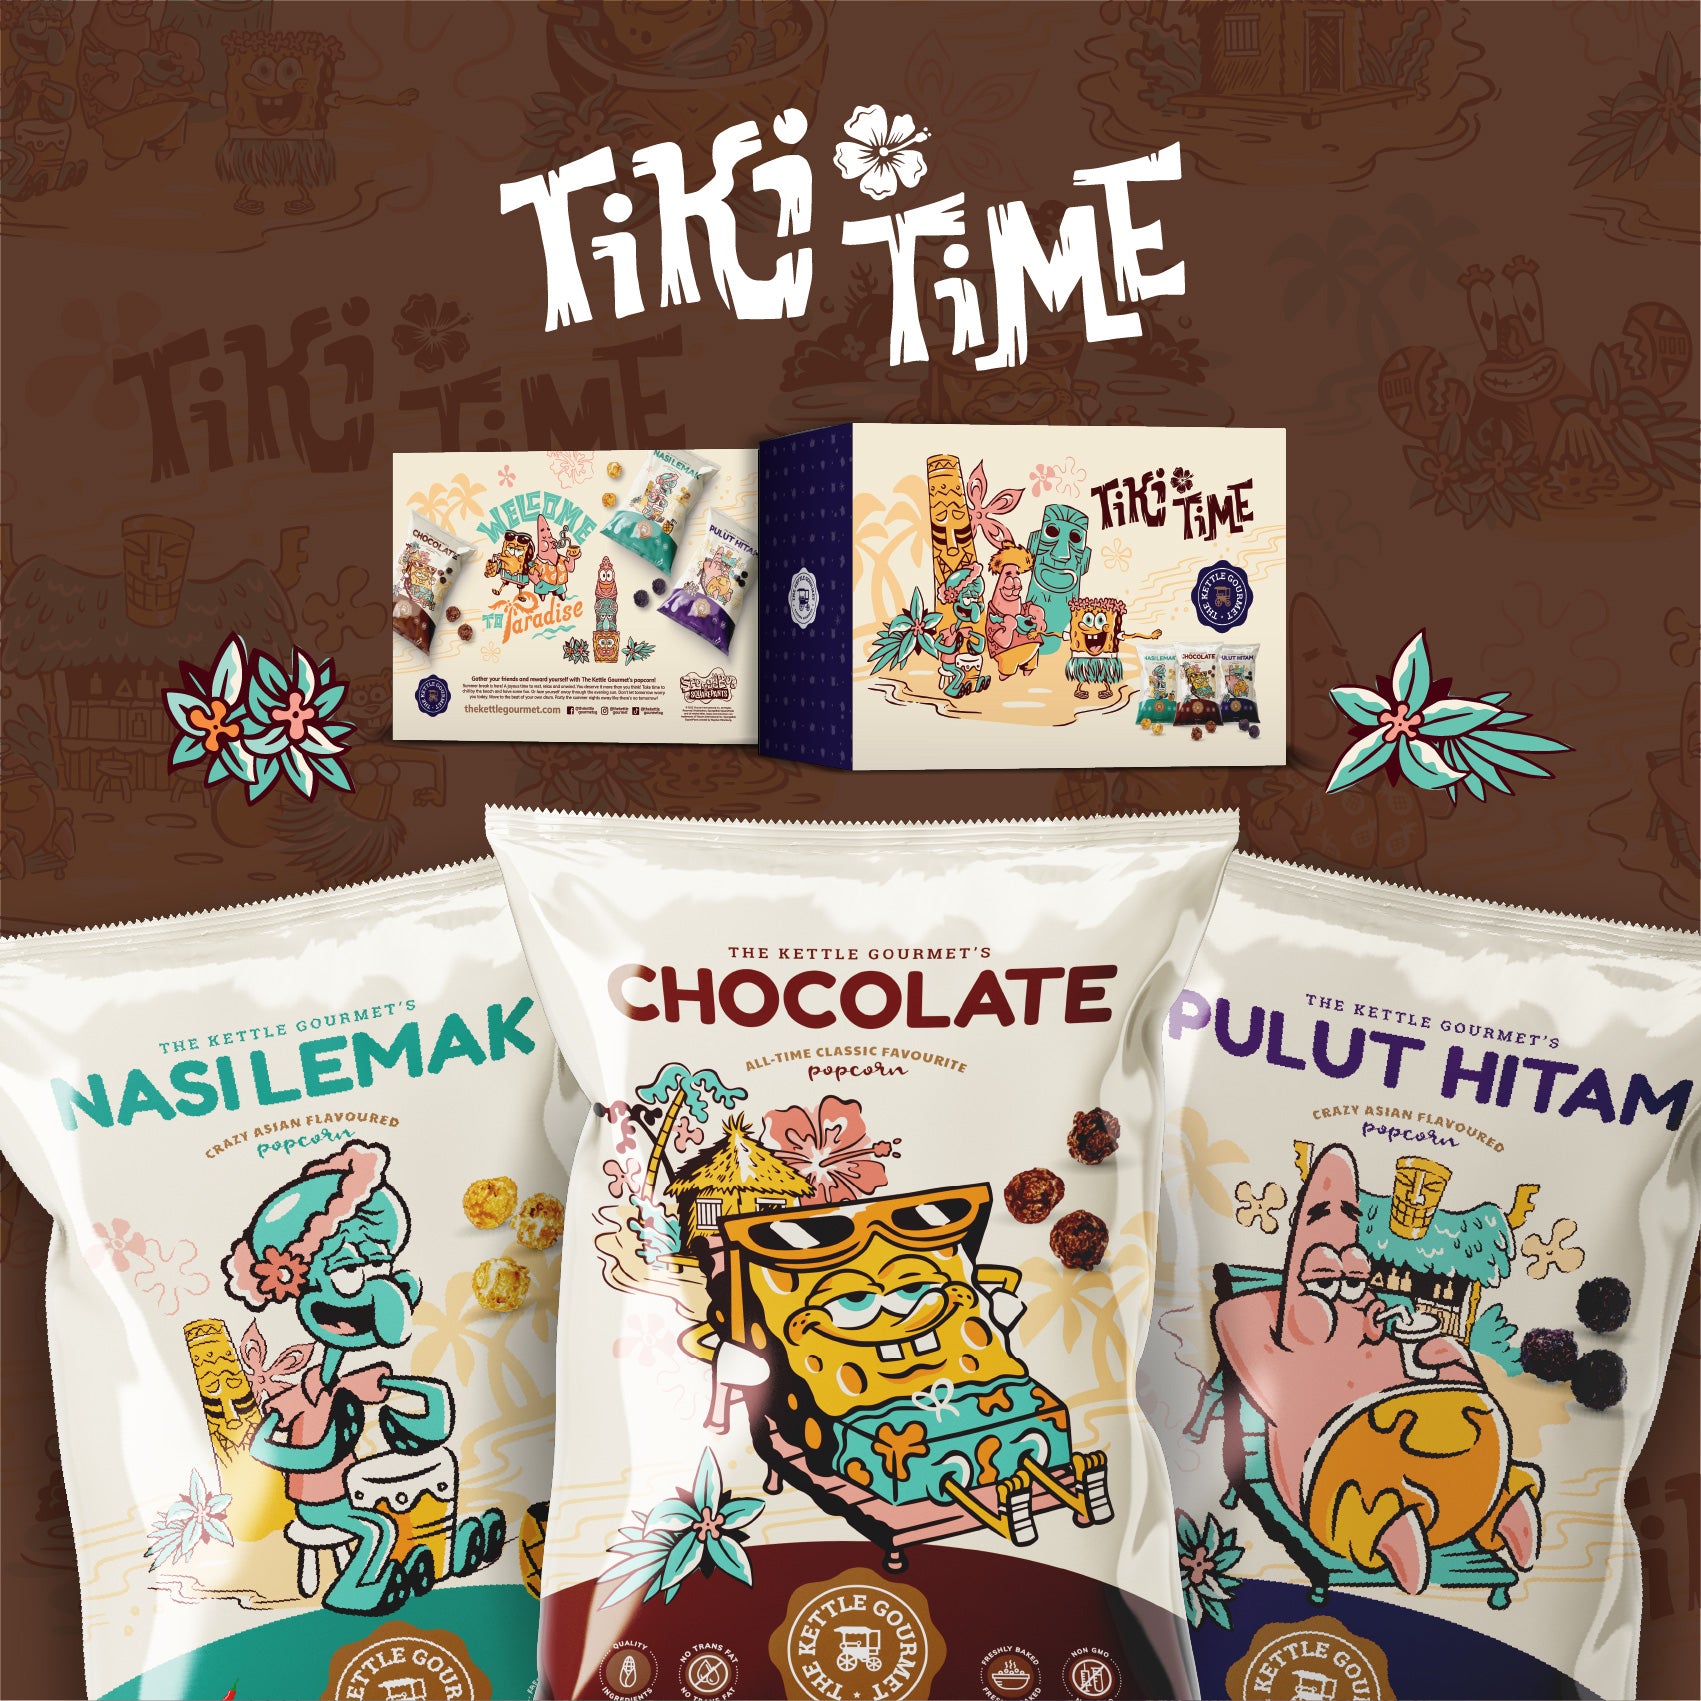 Introducing our New TIKI TIME Series